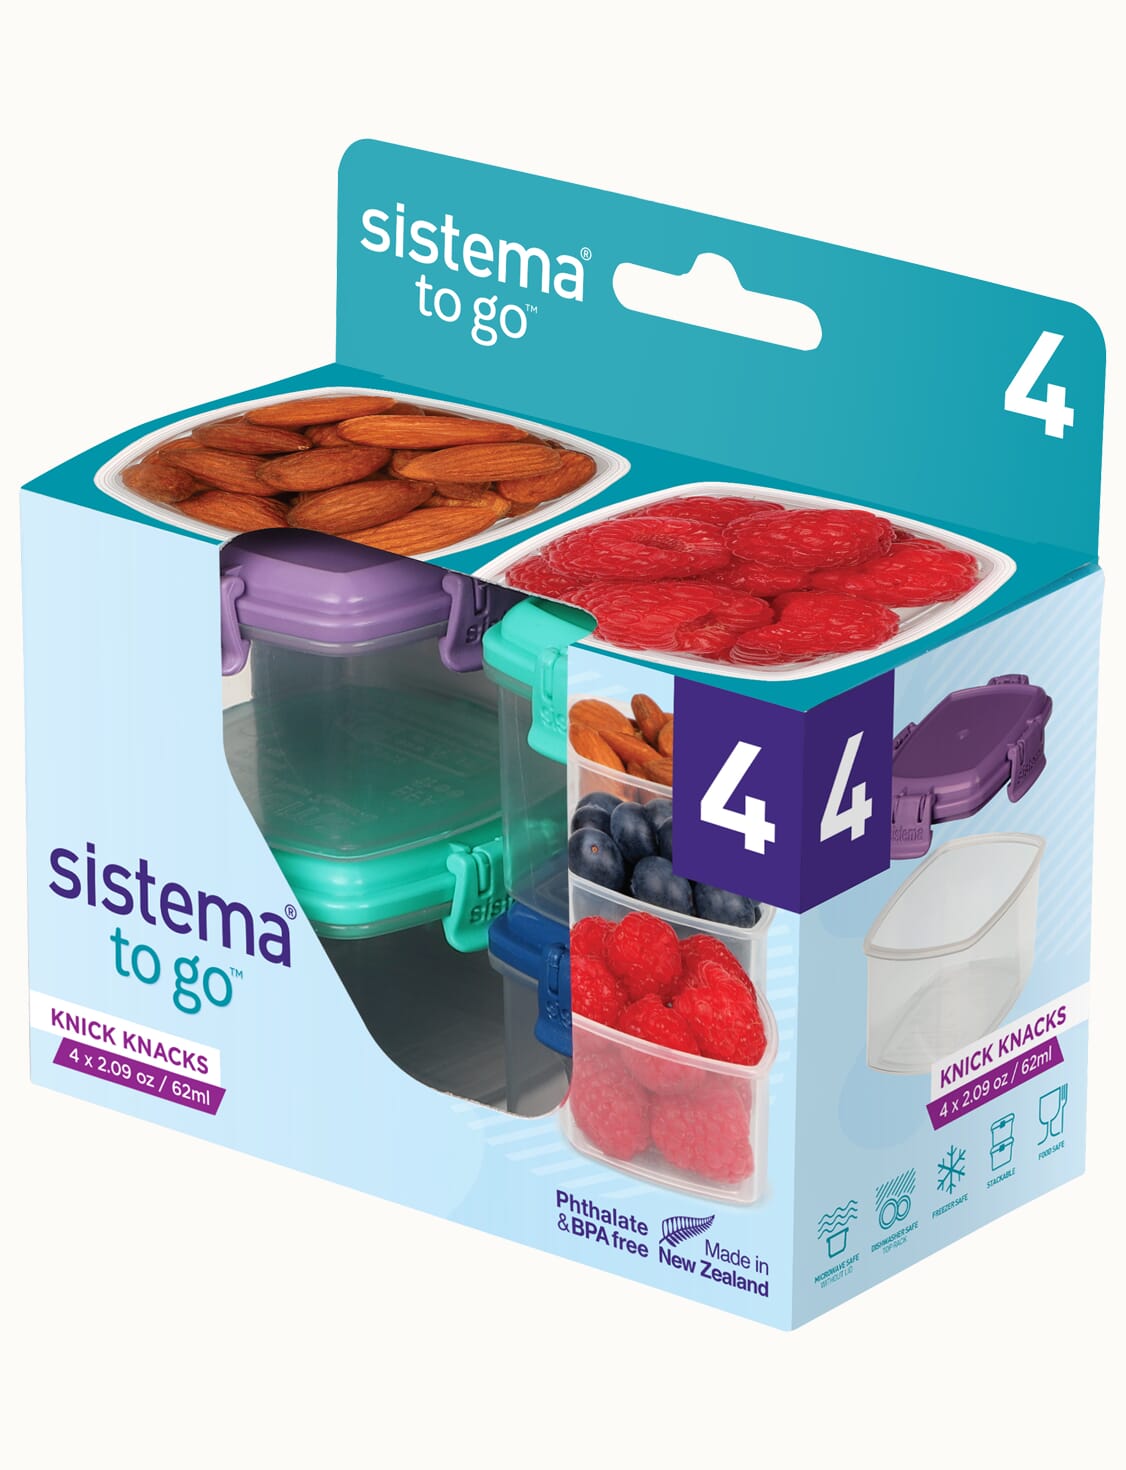 A SET OF 4 FROZEN TREAT HOLDERS -One End Is Designed To Hold A